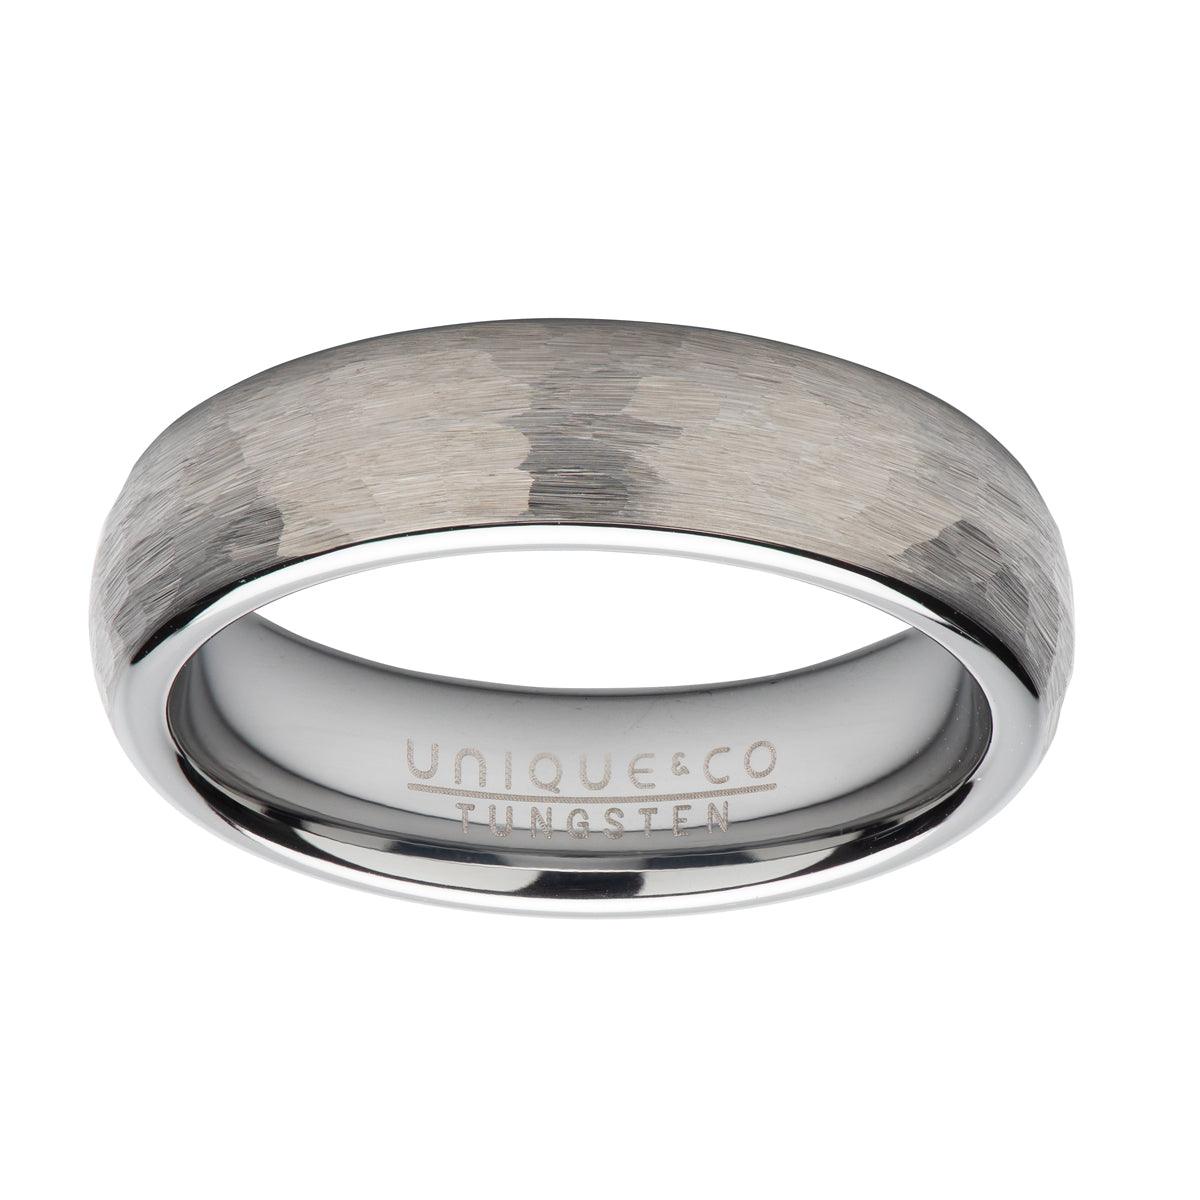 Unique & Co Hammered Polished Tungsten Band Ring - Rococo Jewellery